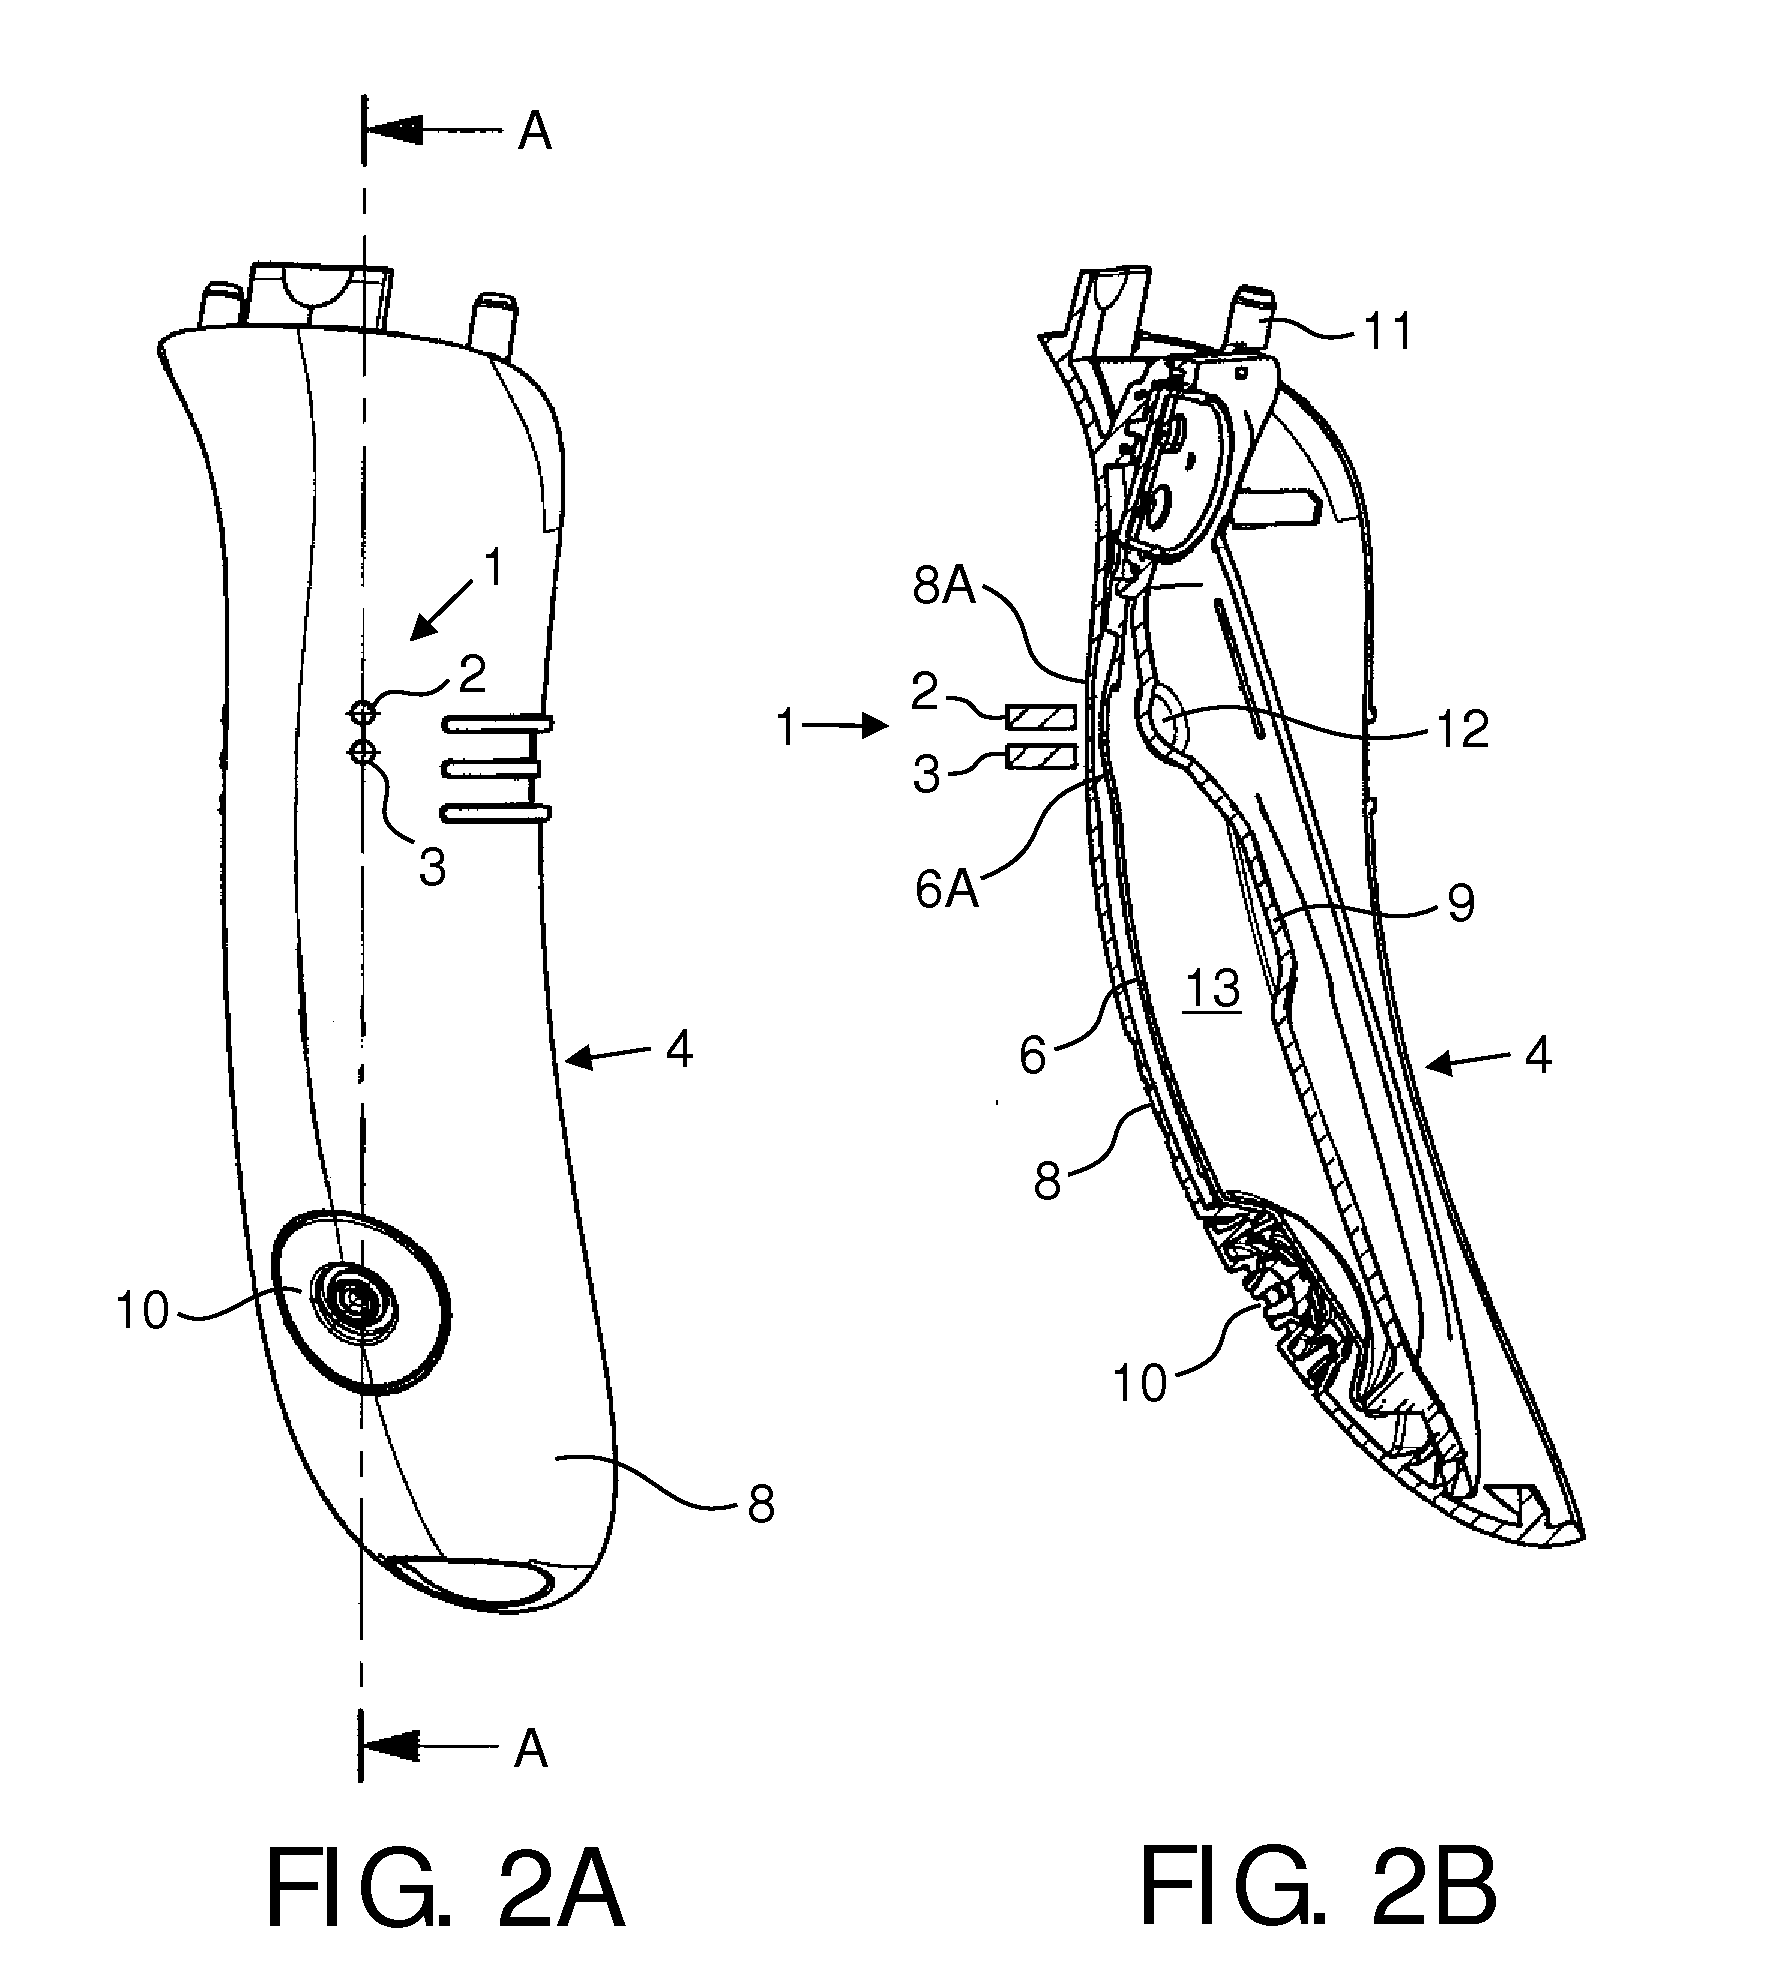 Assembly comprising a portable device having fluid-fillable container and a holder